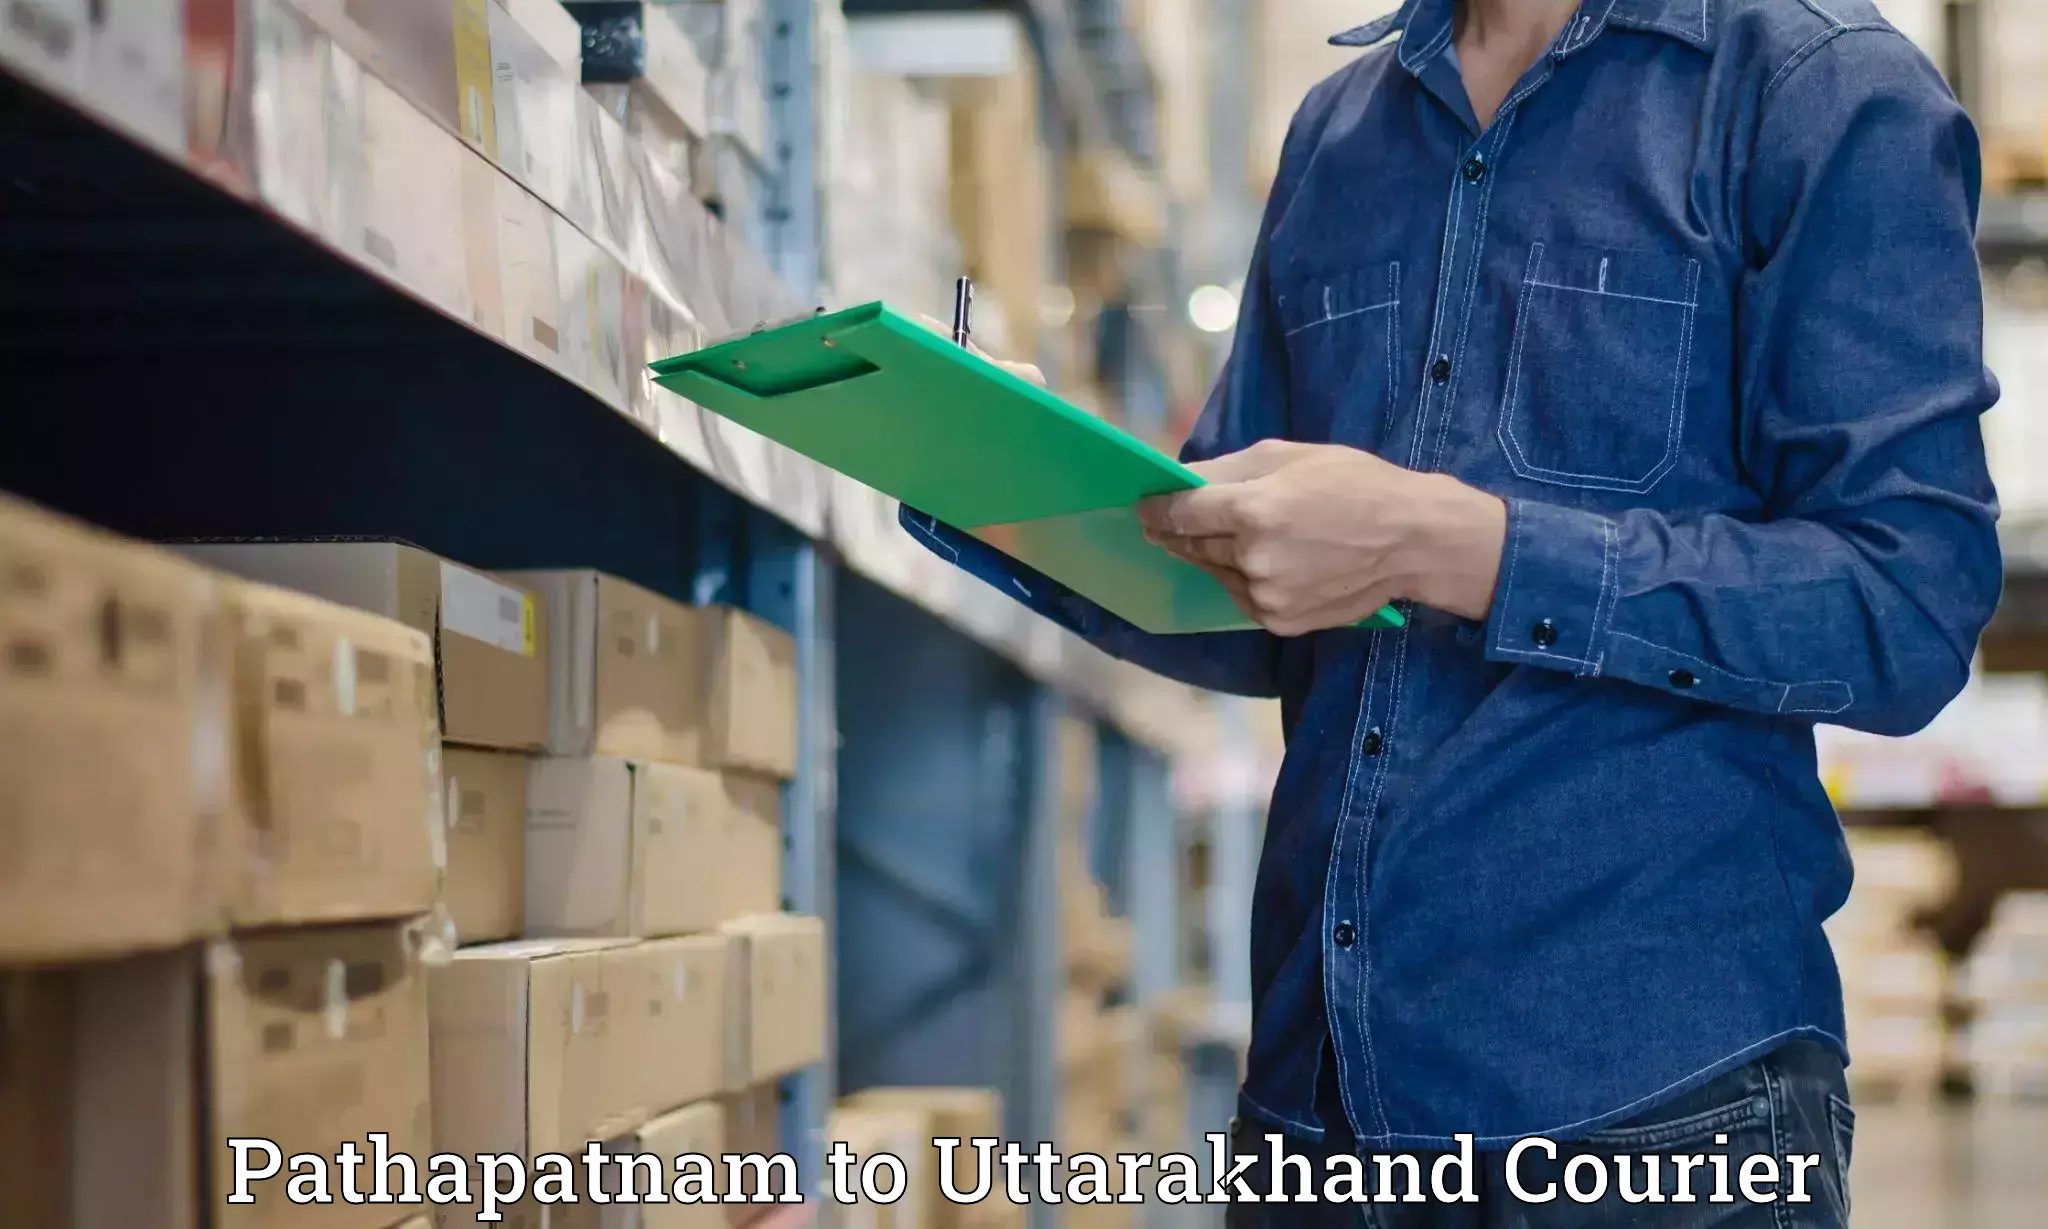 Efficient order fulfillment Pathapatnam to Paithani